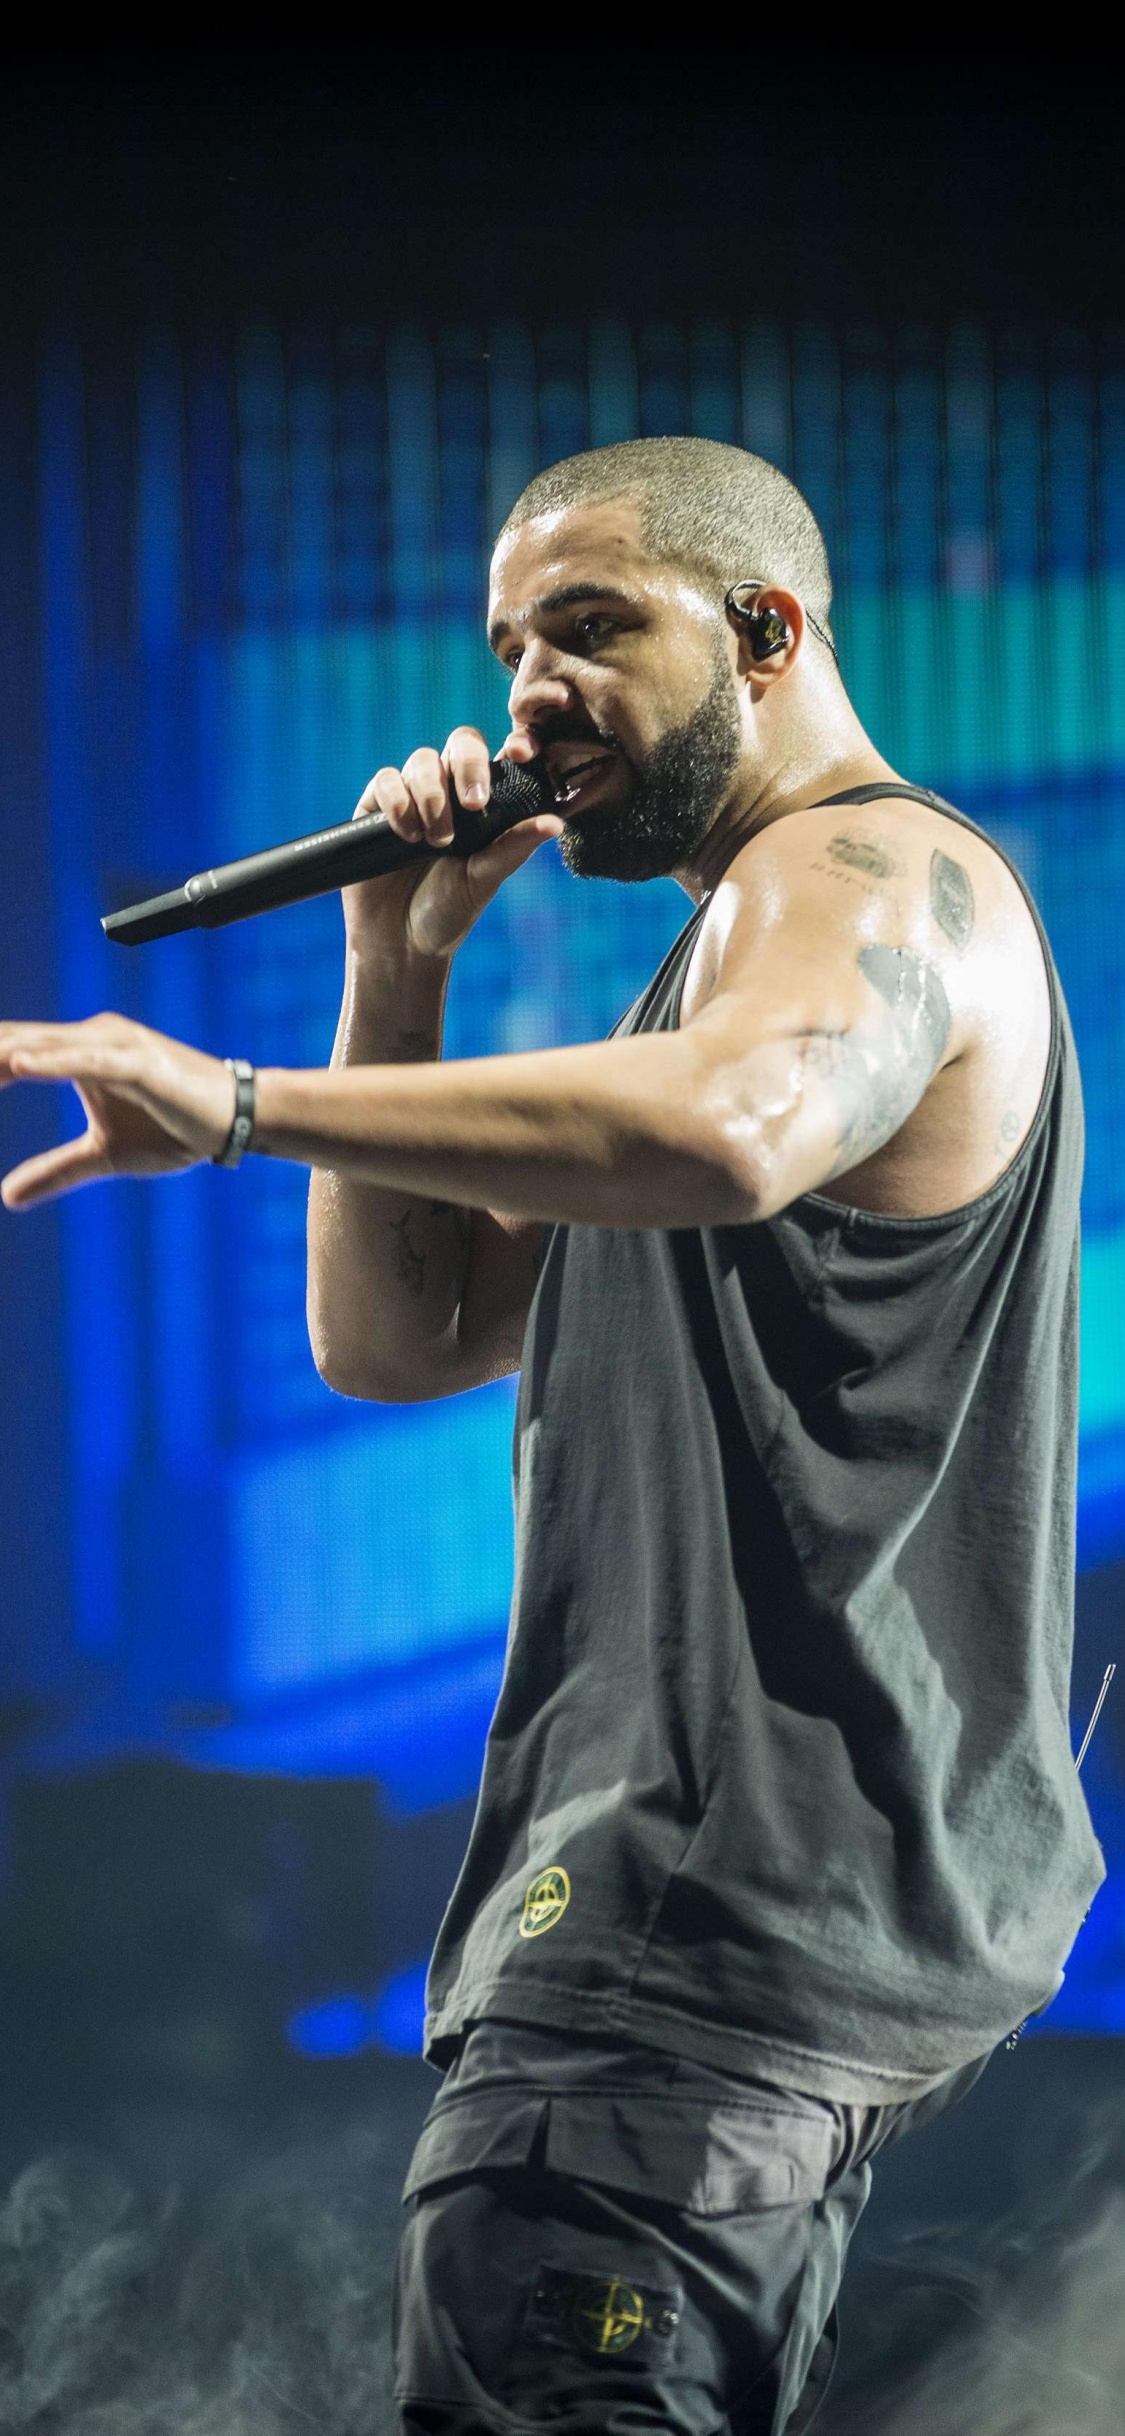 Drake Live, Rapper, Aubrey The Three Migos Tour, More Life, Concert. Wallpaper in 1125x2436 Resolution